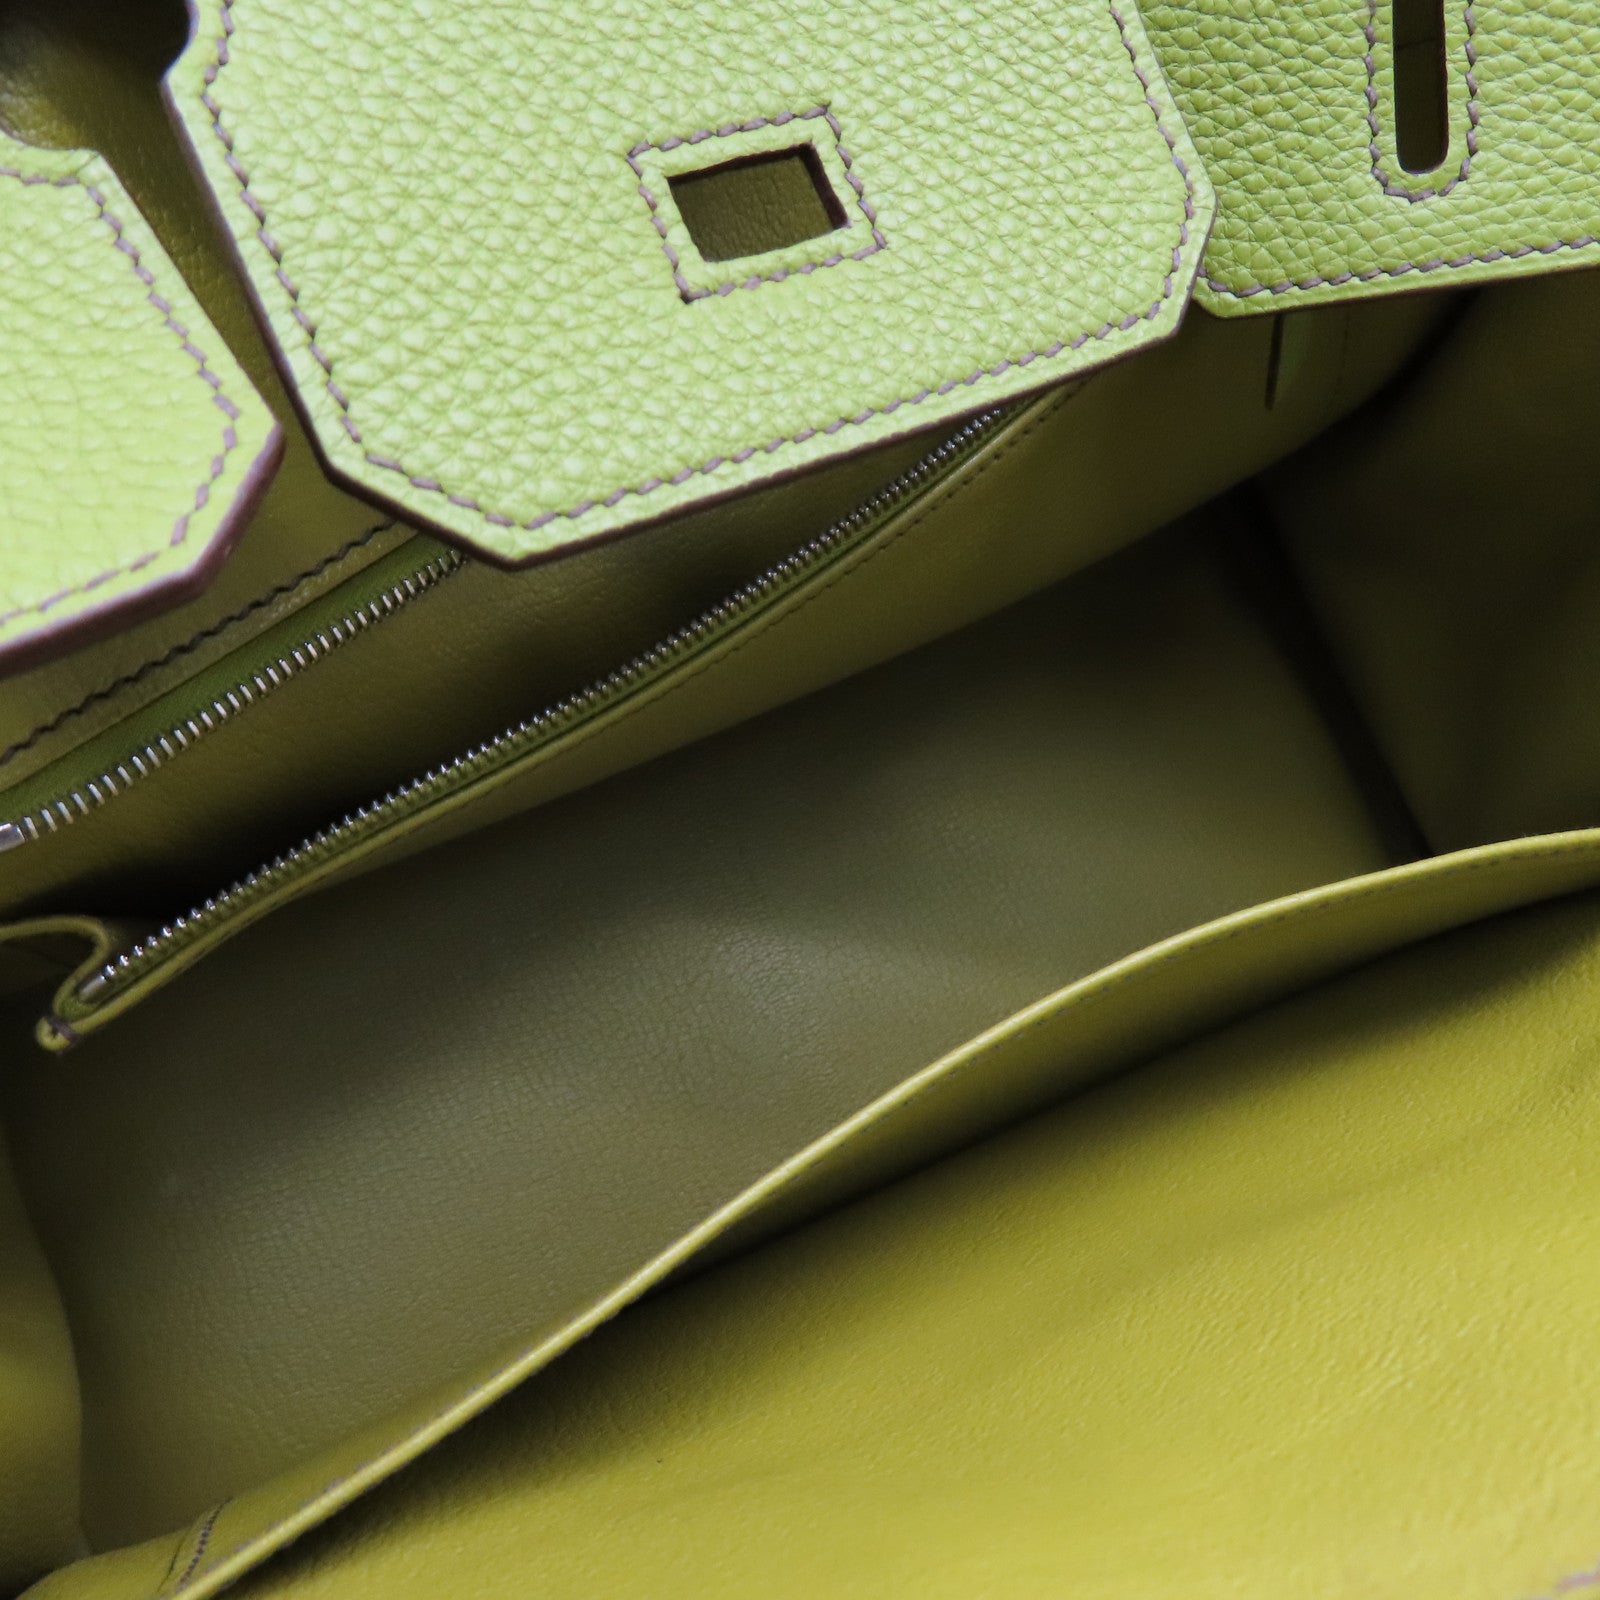 2007 Hermes Vert Anis Clemence Leather Picotin GM